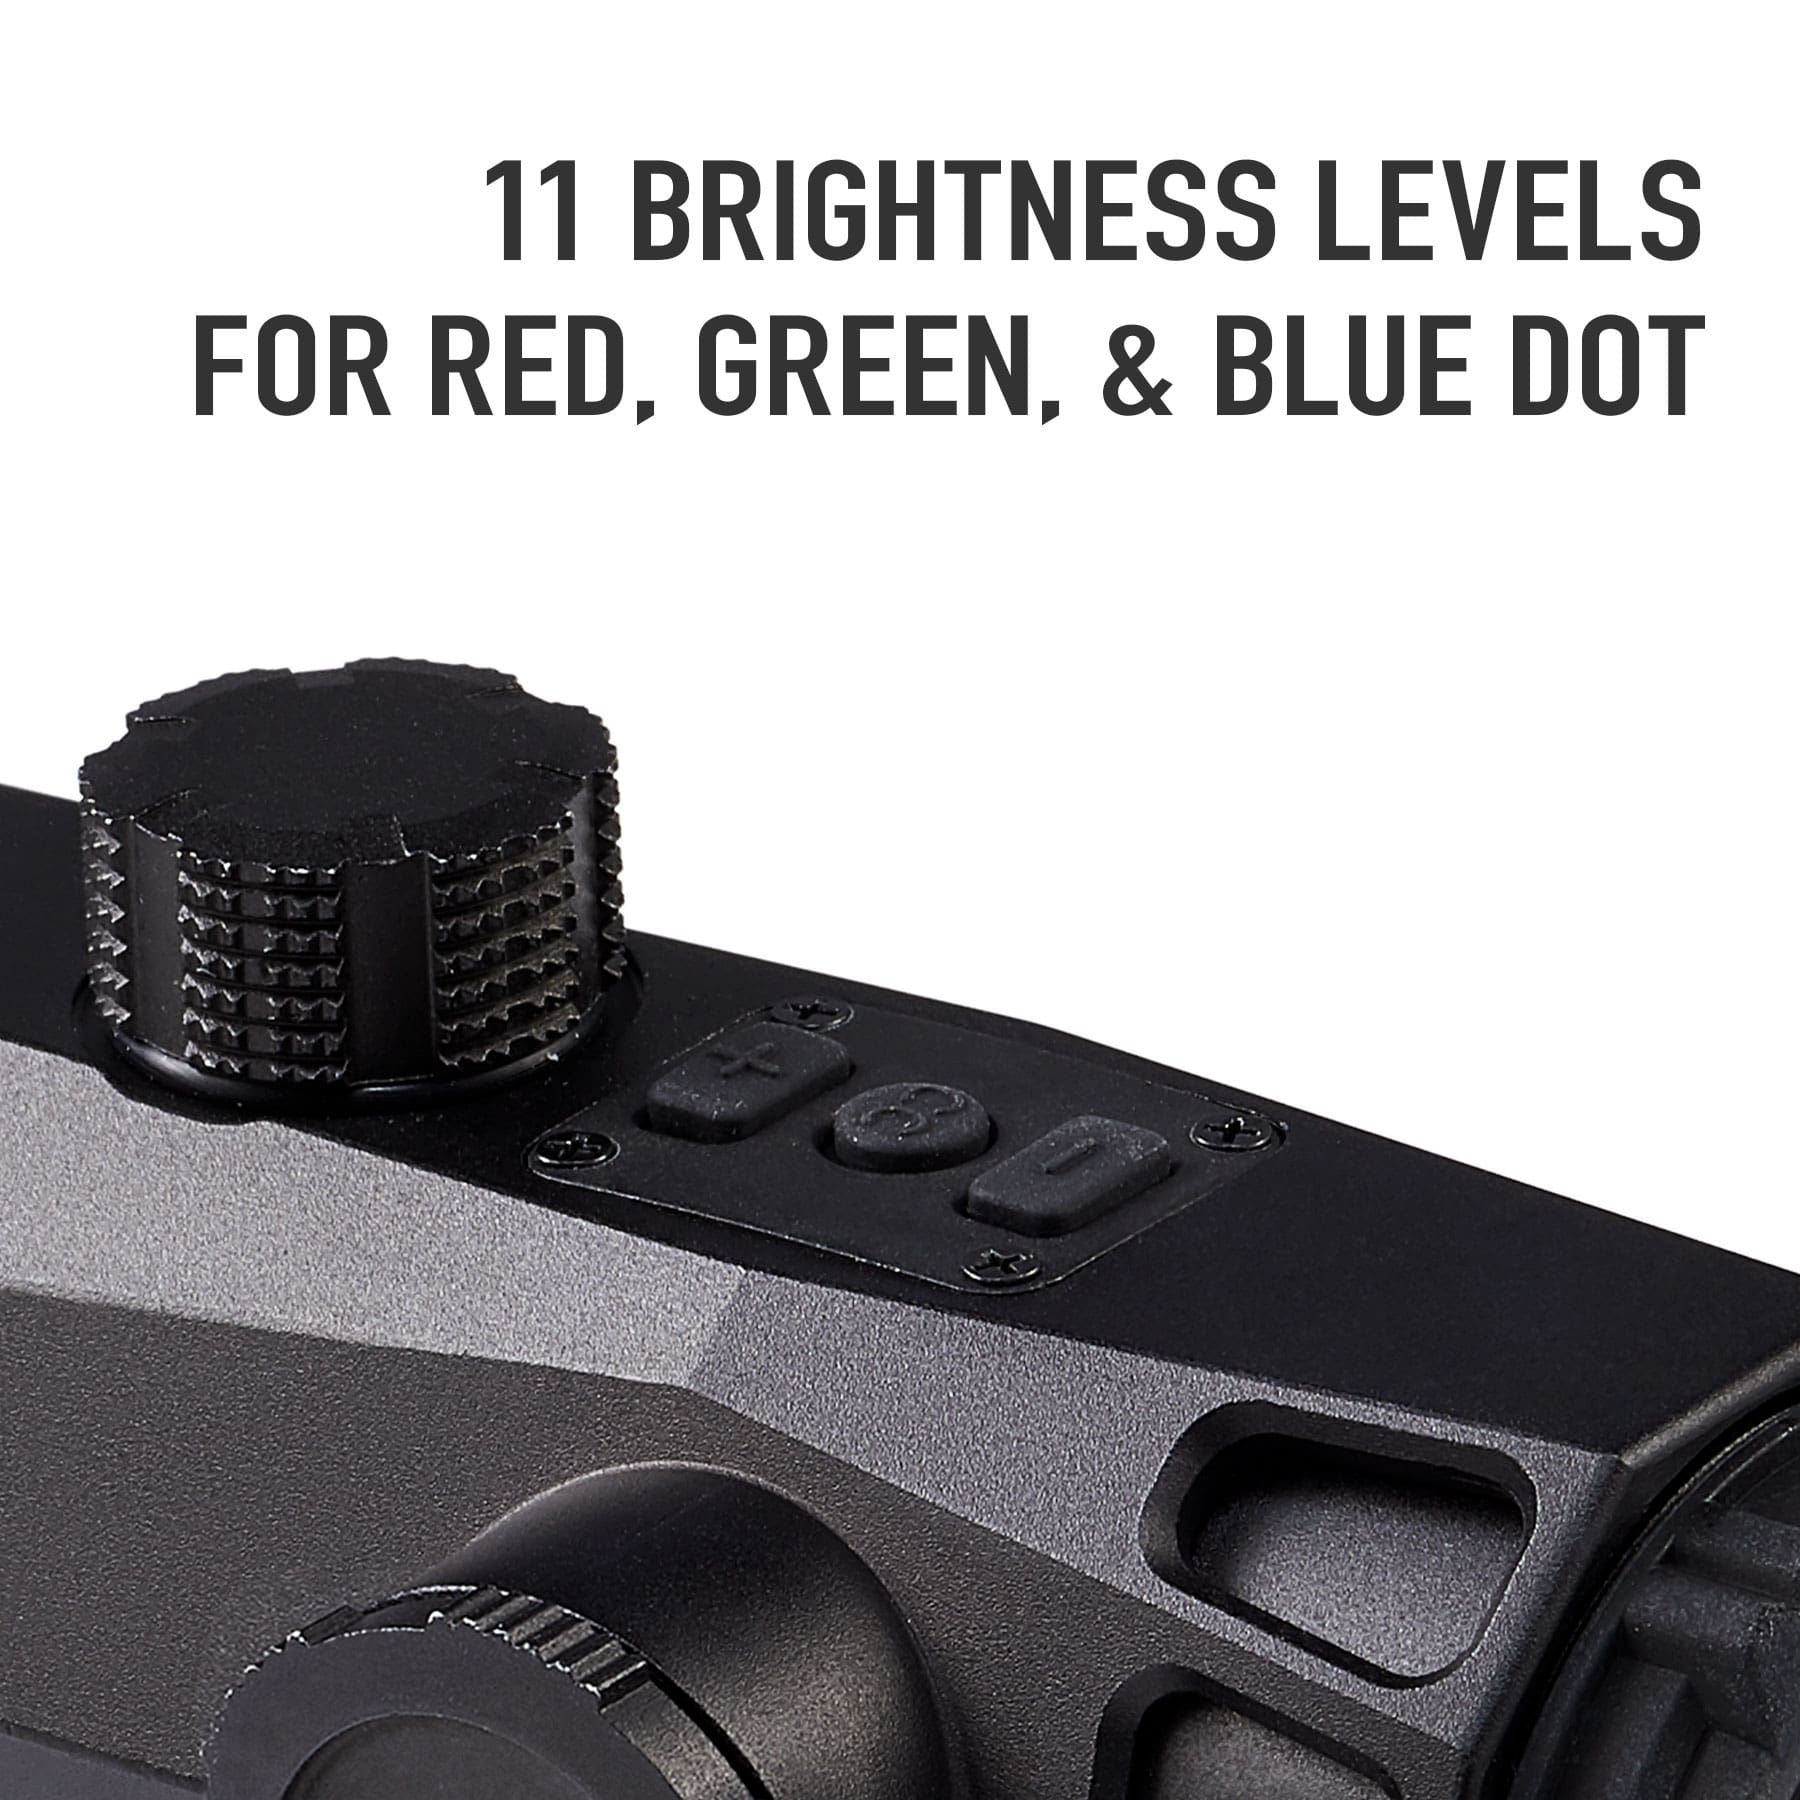     Red-dot-sight-4x32-red-and-green-and-blue-prism-scope